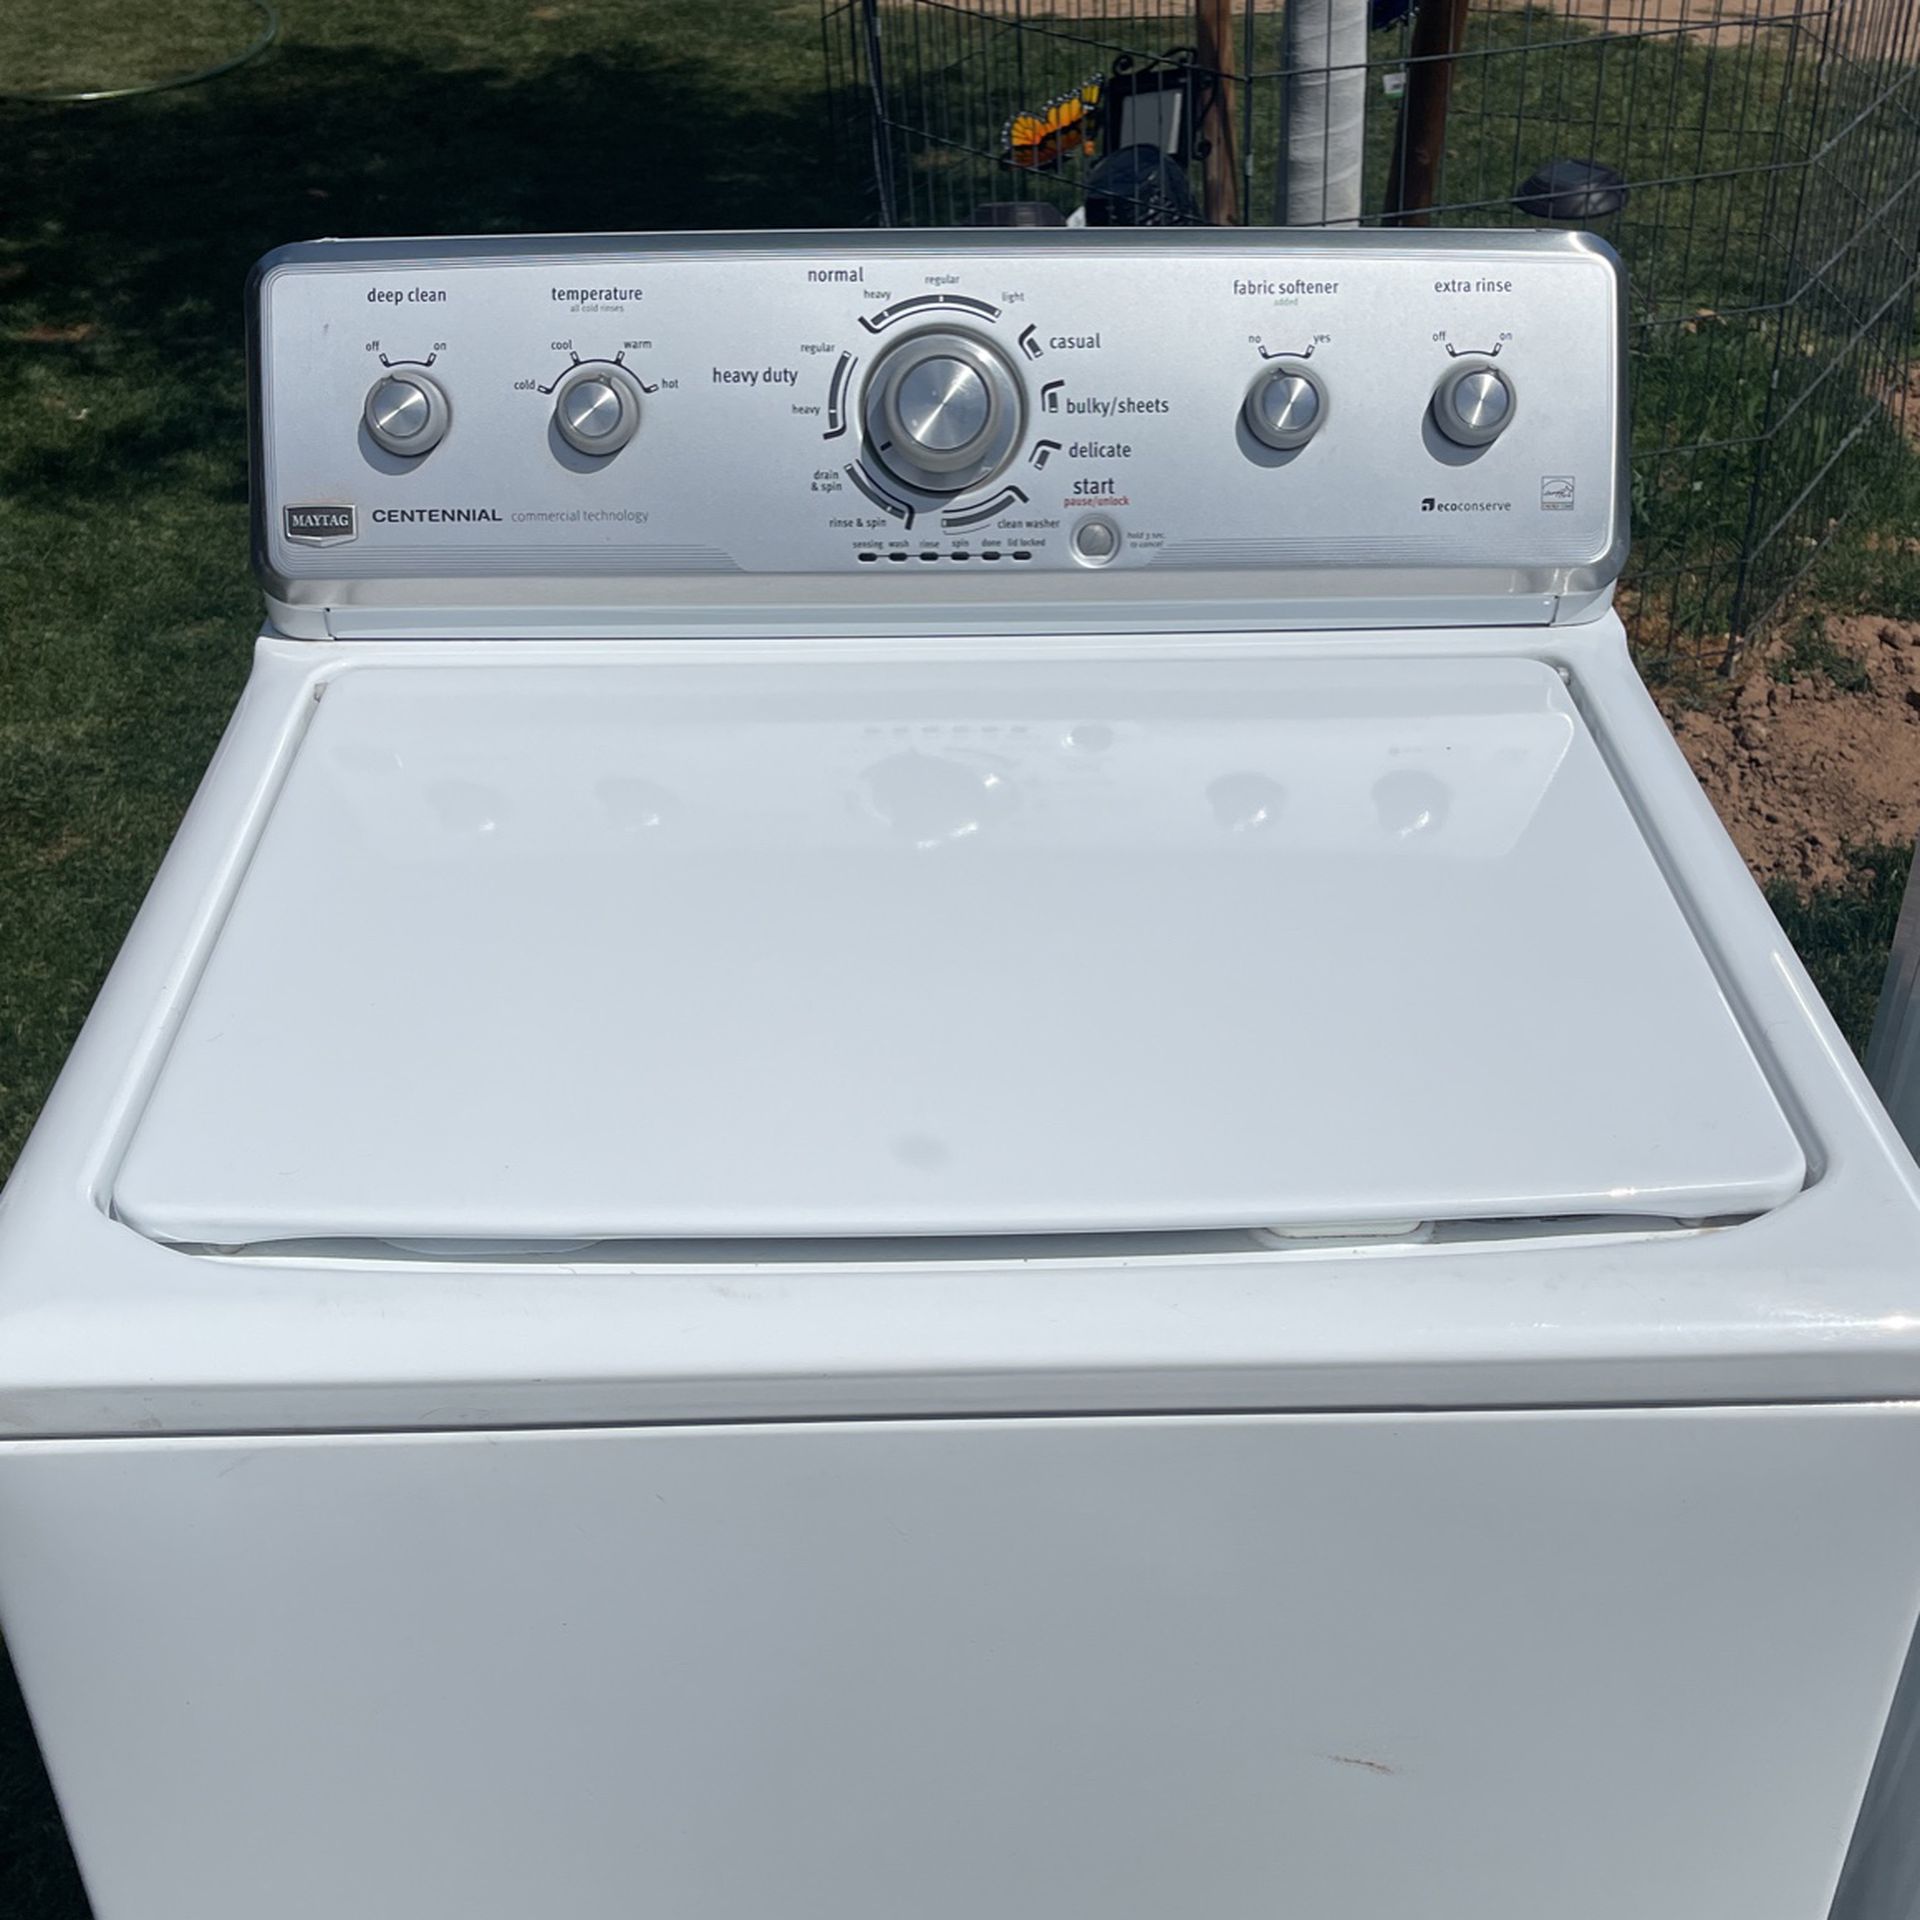 Maytag Centennial, Washer And Dryer